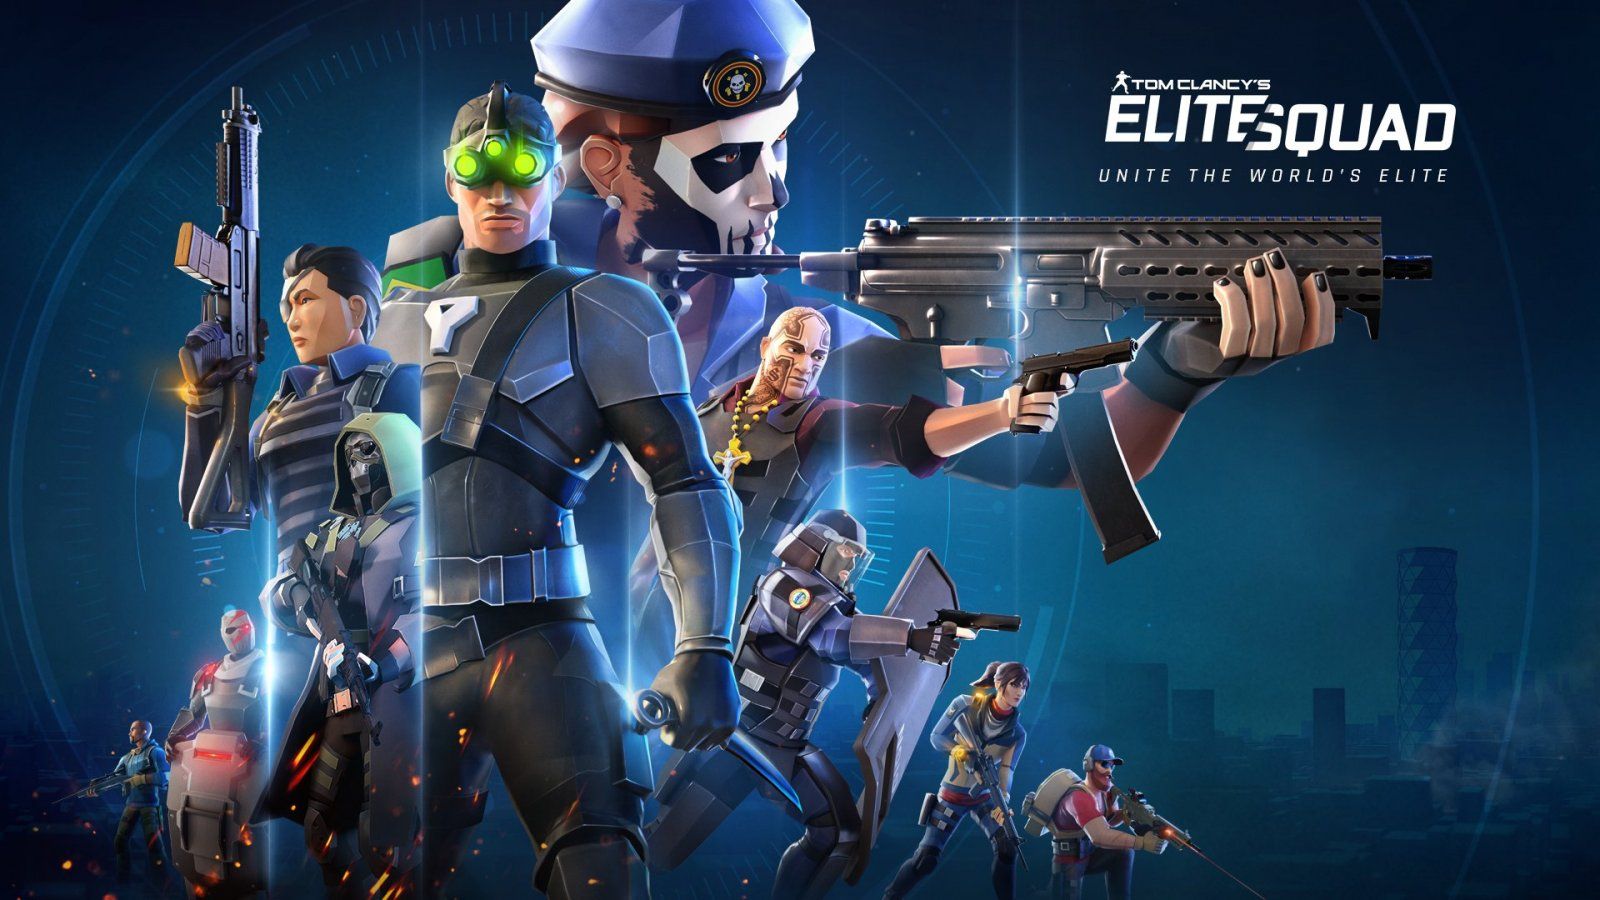 Tom Clancy's Elite Squad to release on mobile on August 27